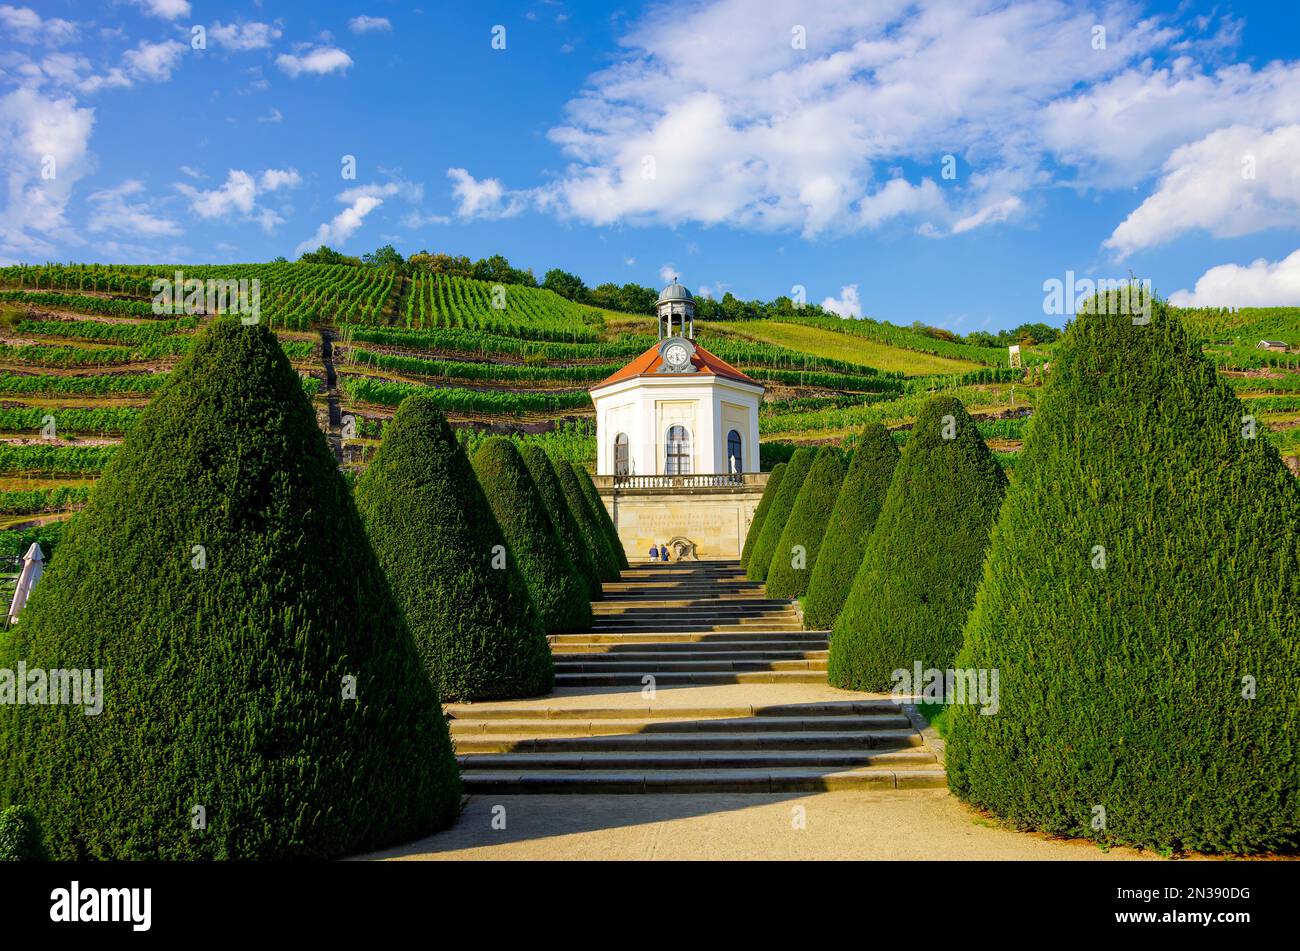 The Belvedere in the garden of Wackerbarth Manor, seat of the Saxon State Winery in Radebeul near Dresden, Saxony, Germany. Stock Photo